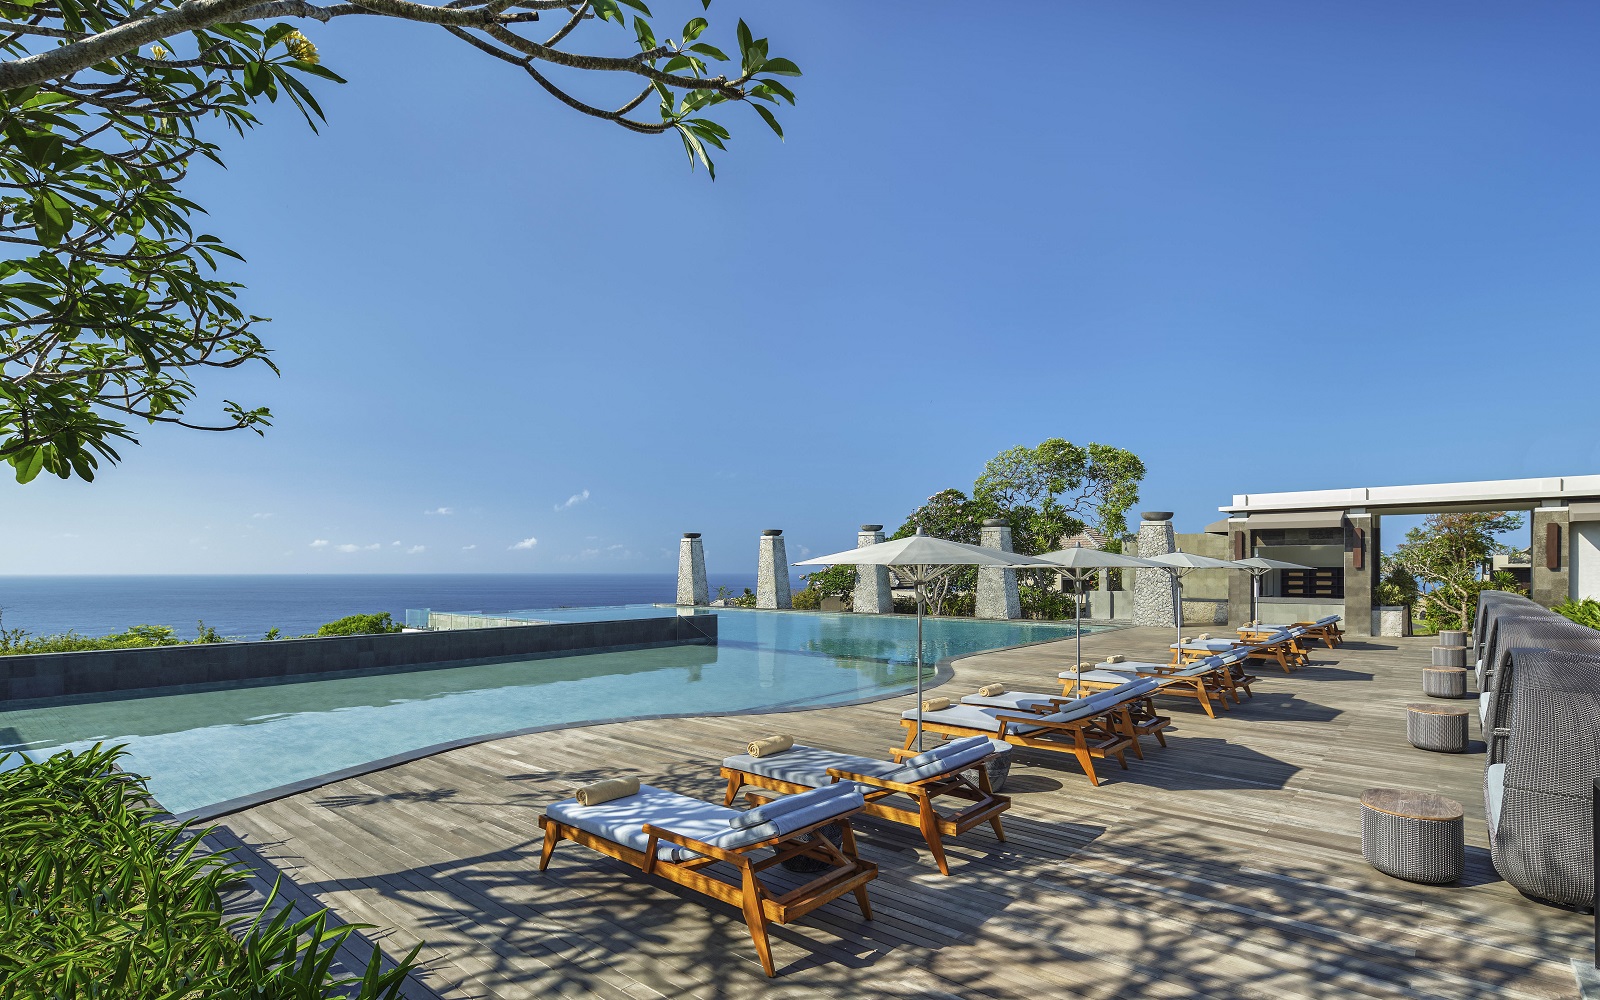 sunloungers and pool with seaview at Bali